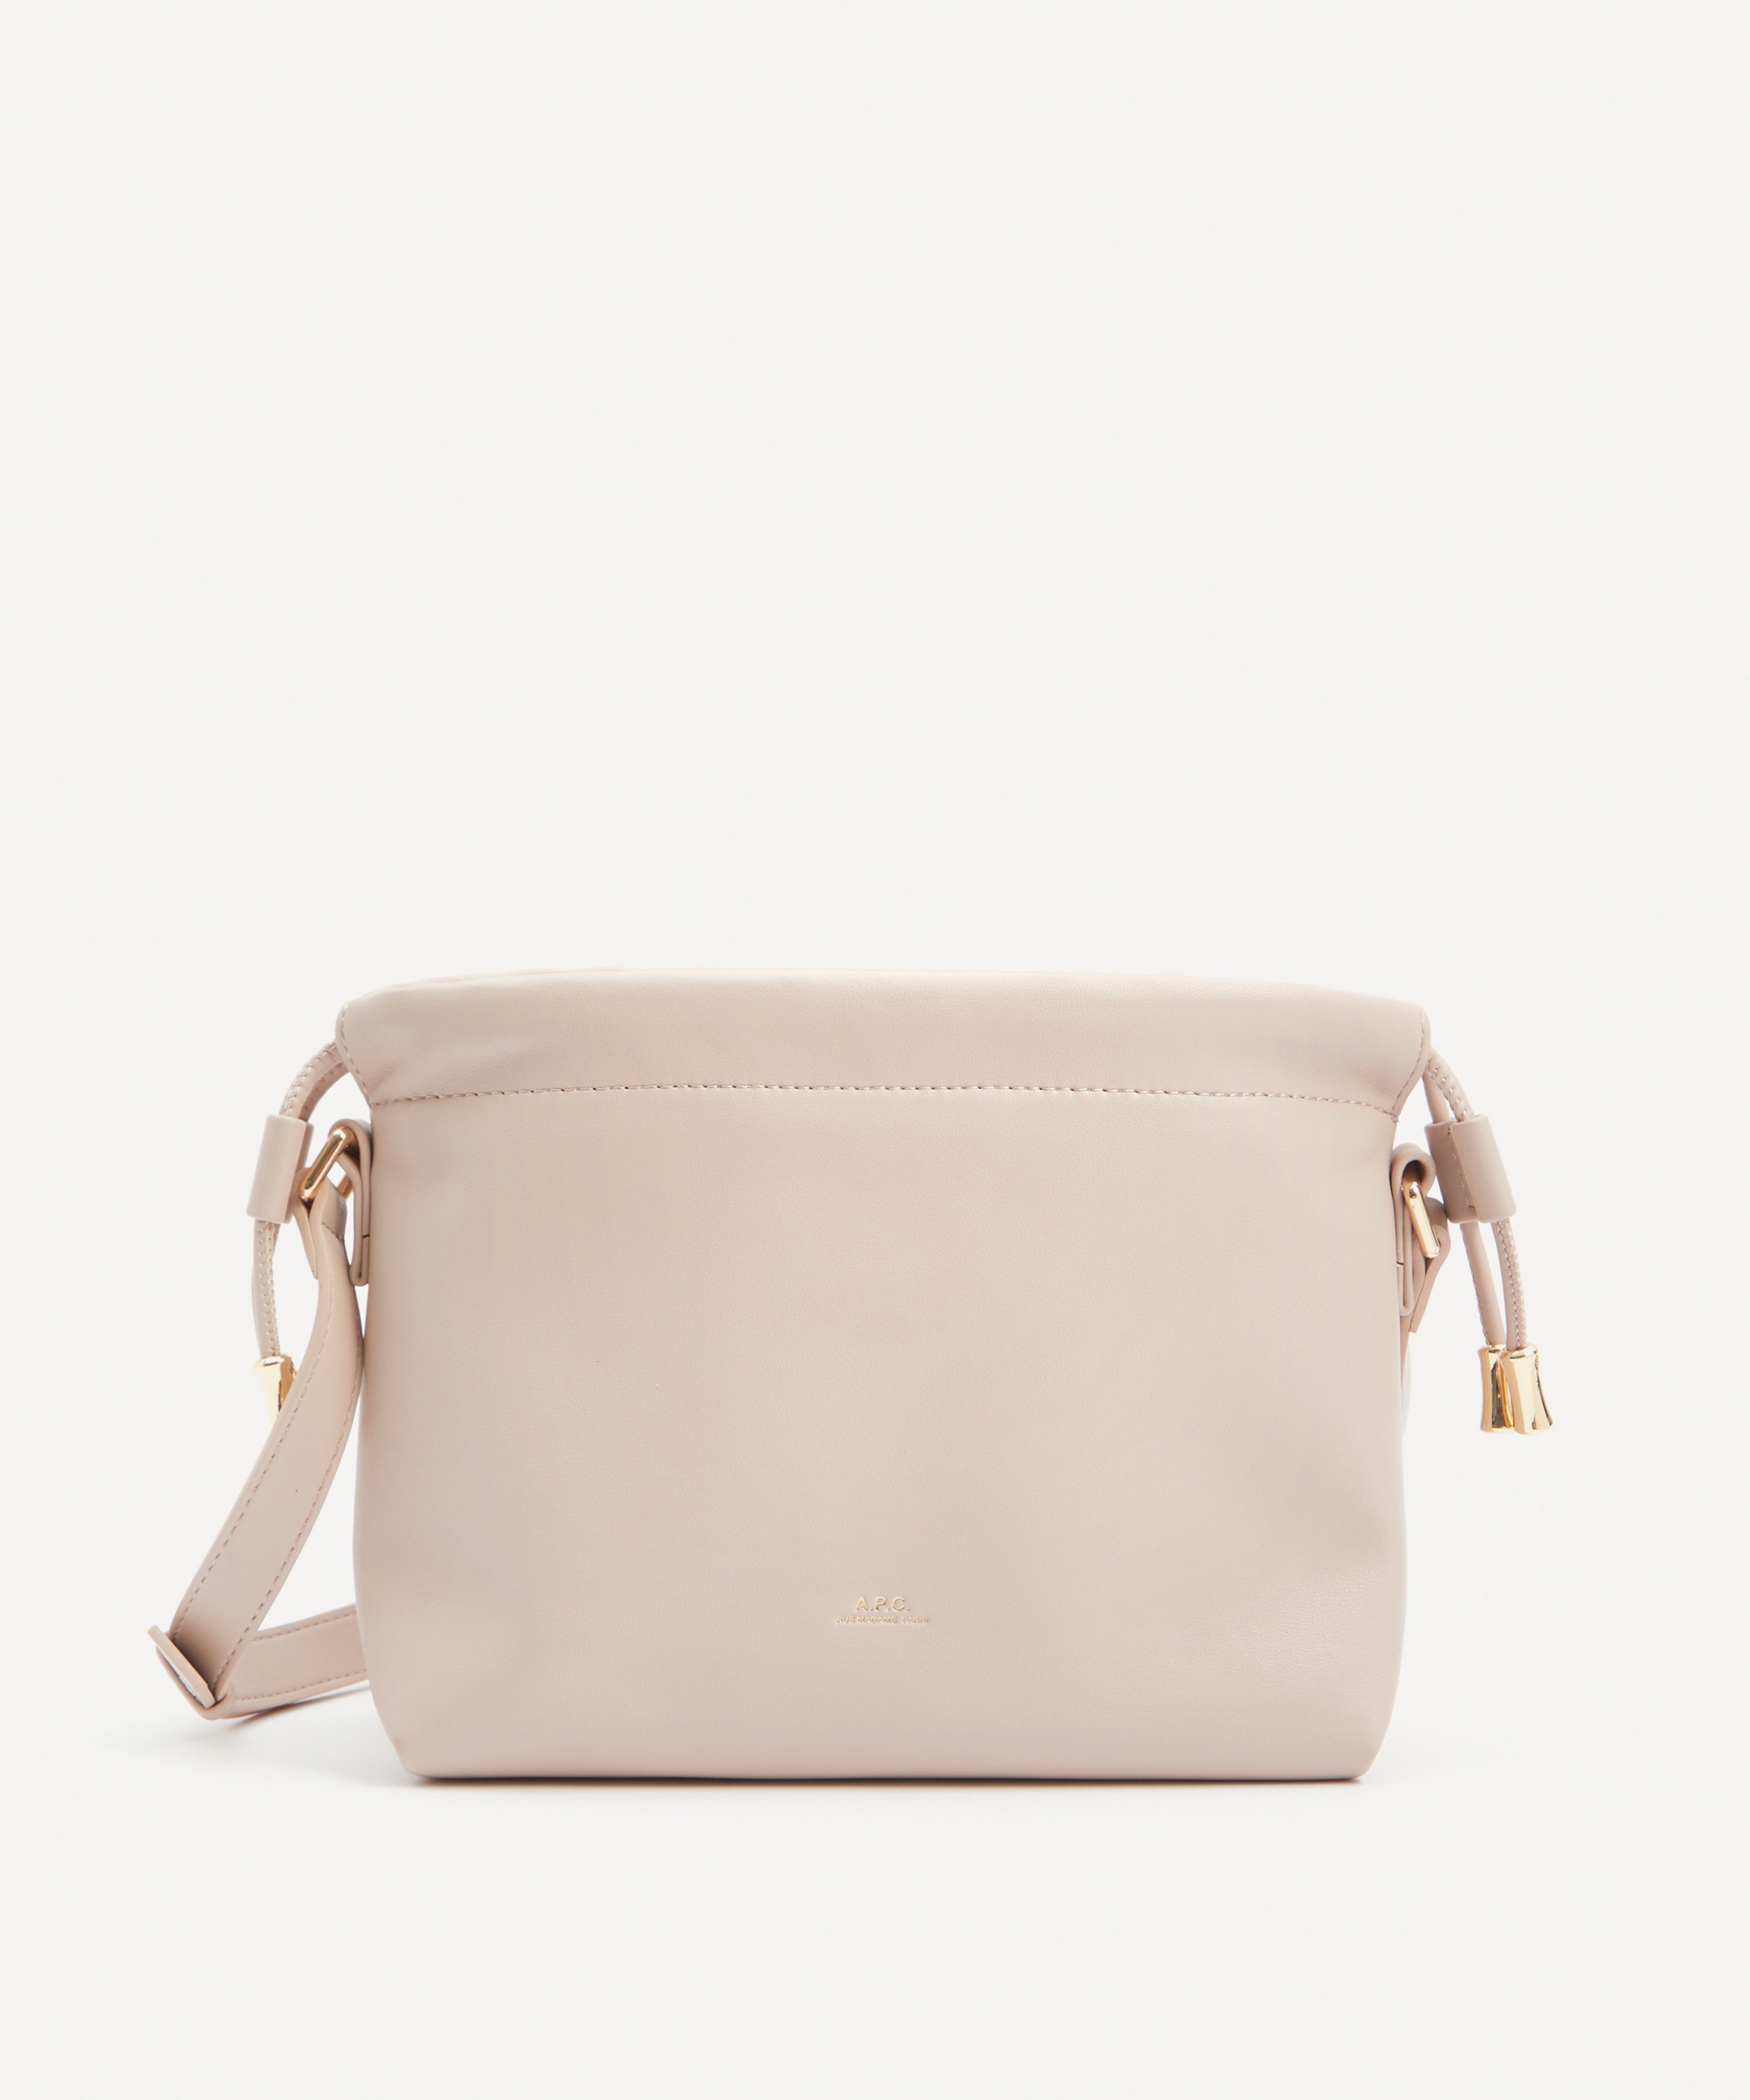 A.P.C. - Ninon Mini Faux Leather Cross-Body Bag image number null